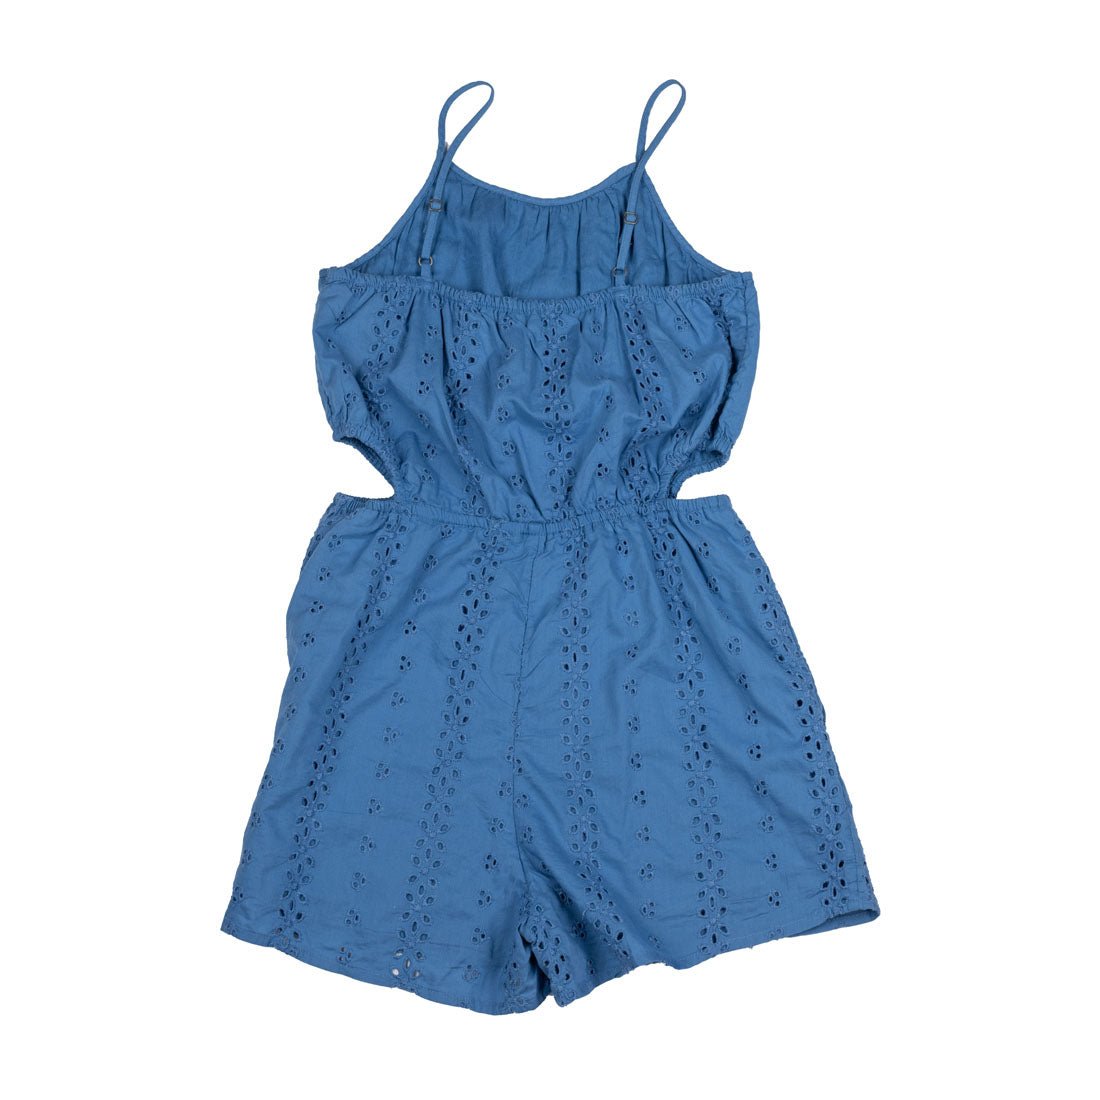 Abercrombie Kids Brand New Jumpsuit For Girls - mymadstore.com